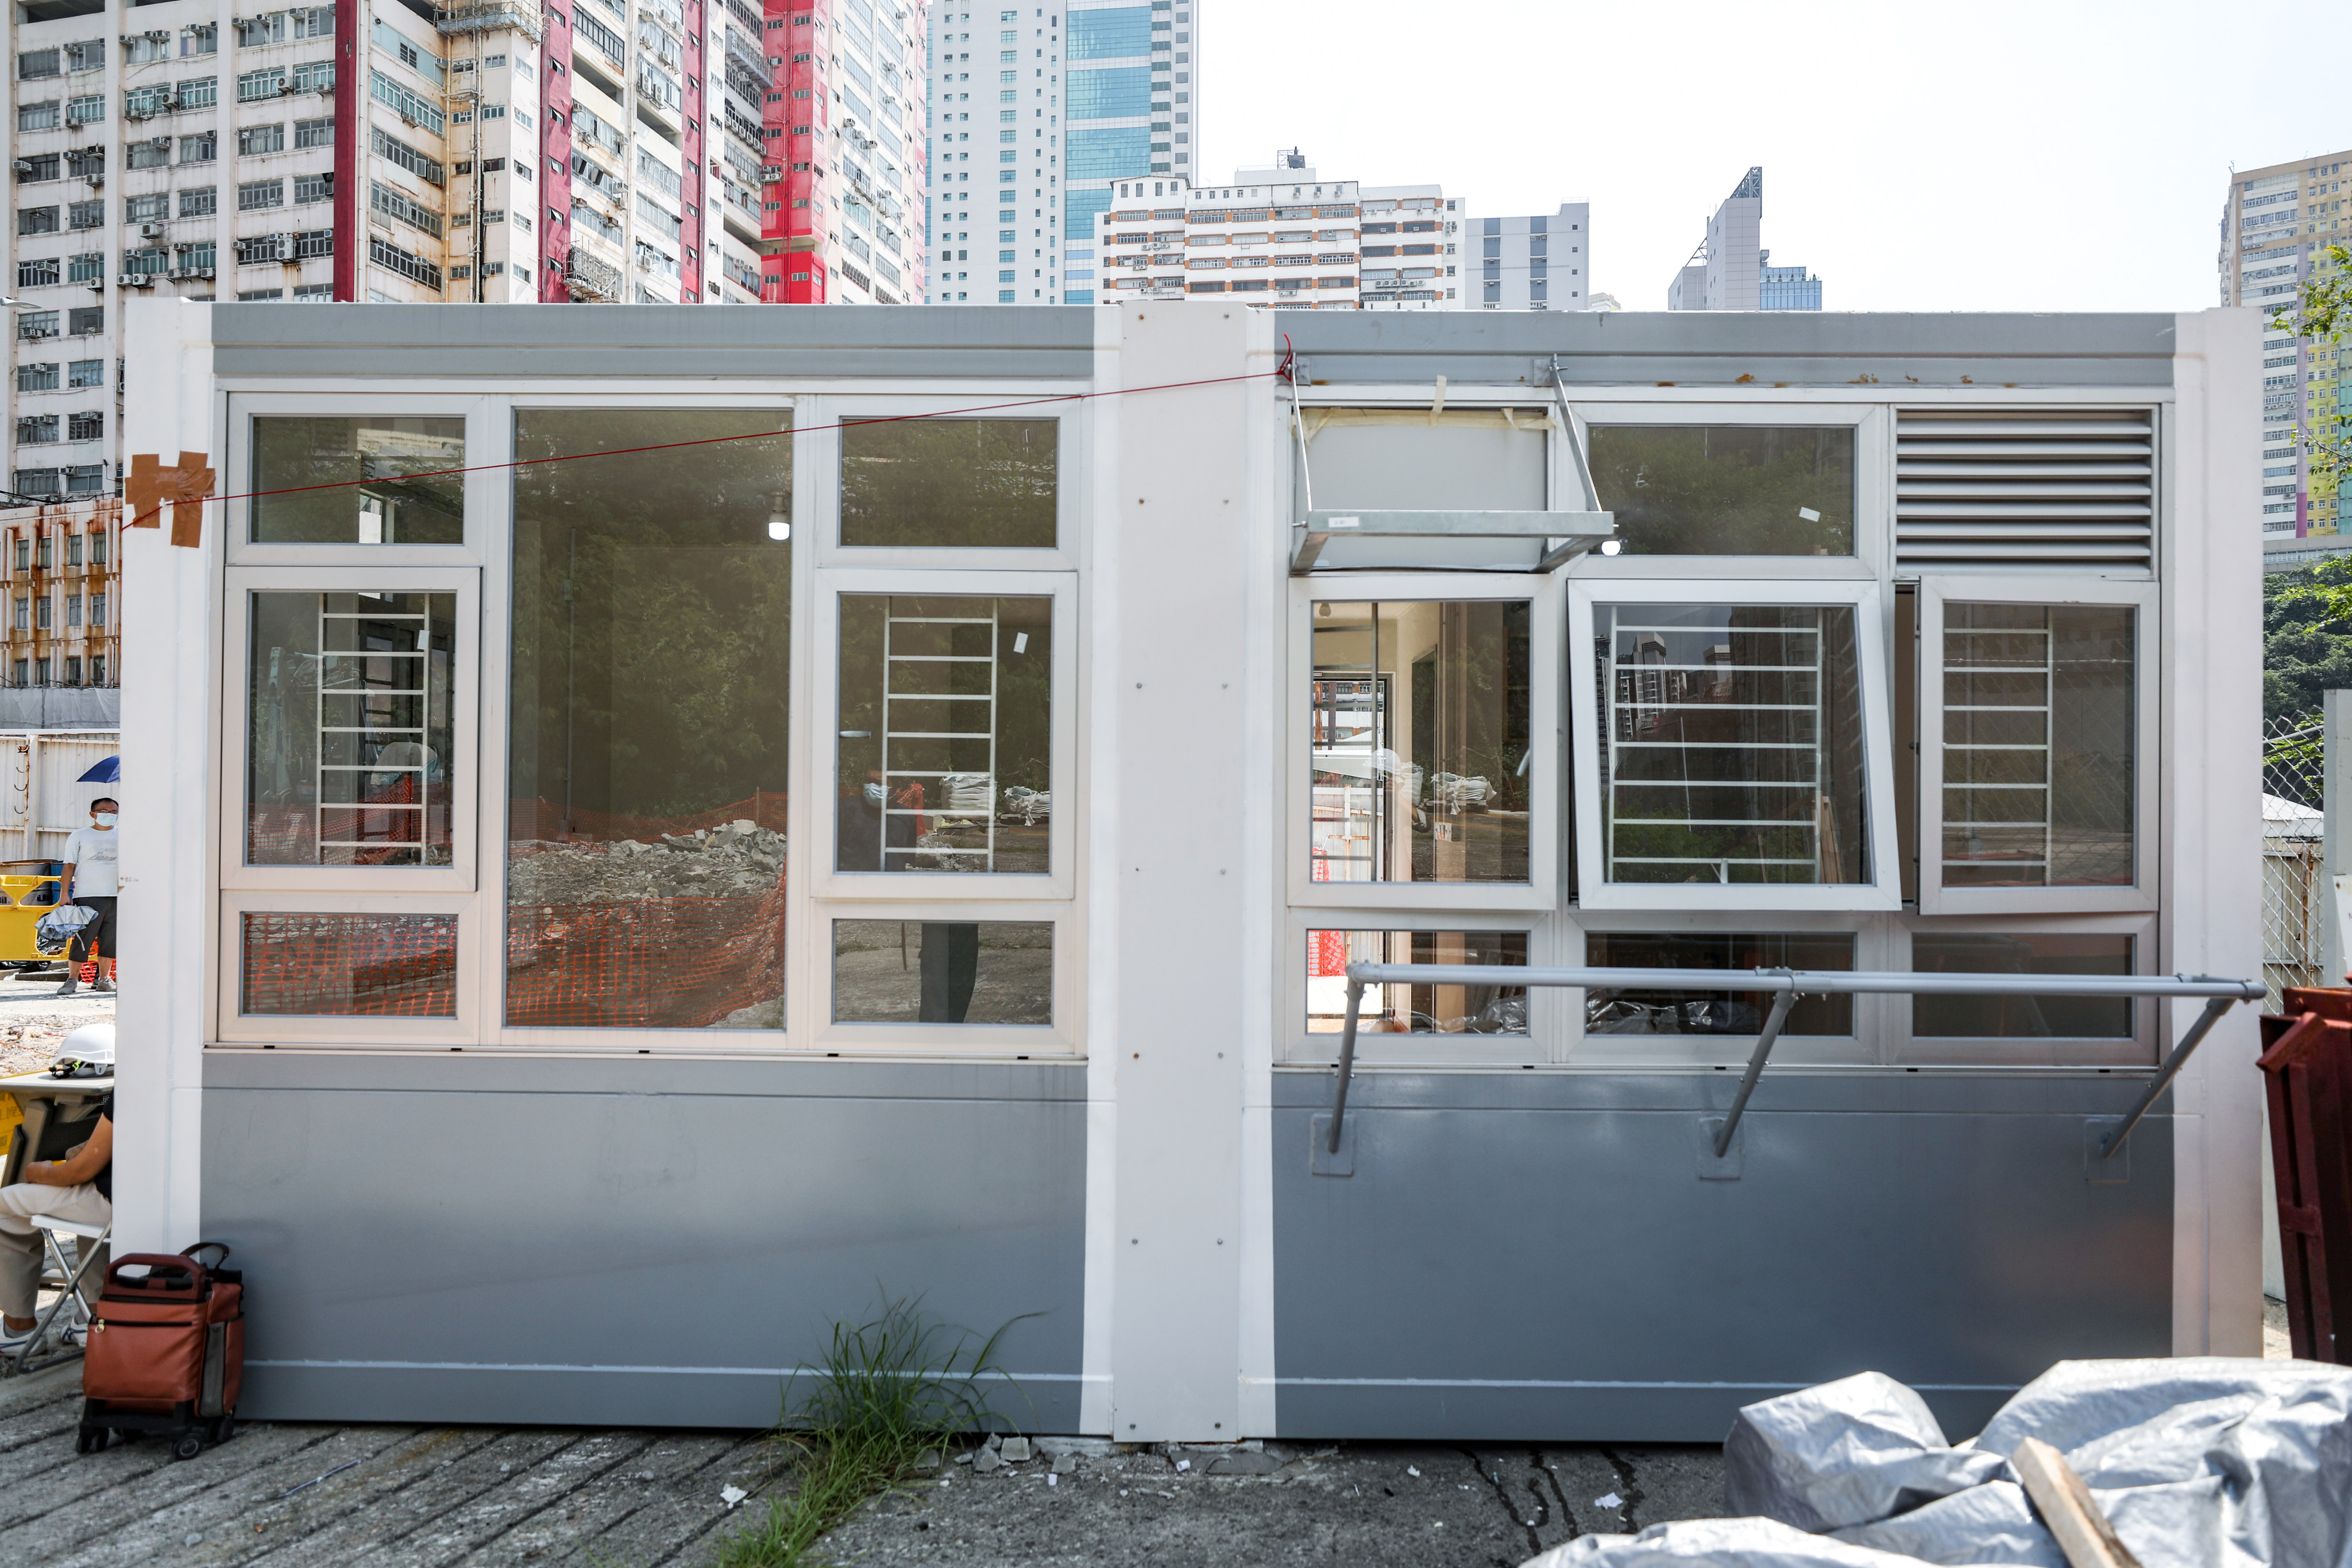 Society for Community Organisation reveals details of a transitional housing project under a five-year lease with the government in Kwai Chung. Photo: Xiaomei Chen